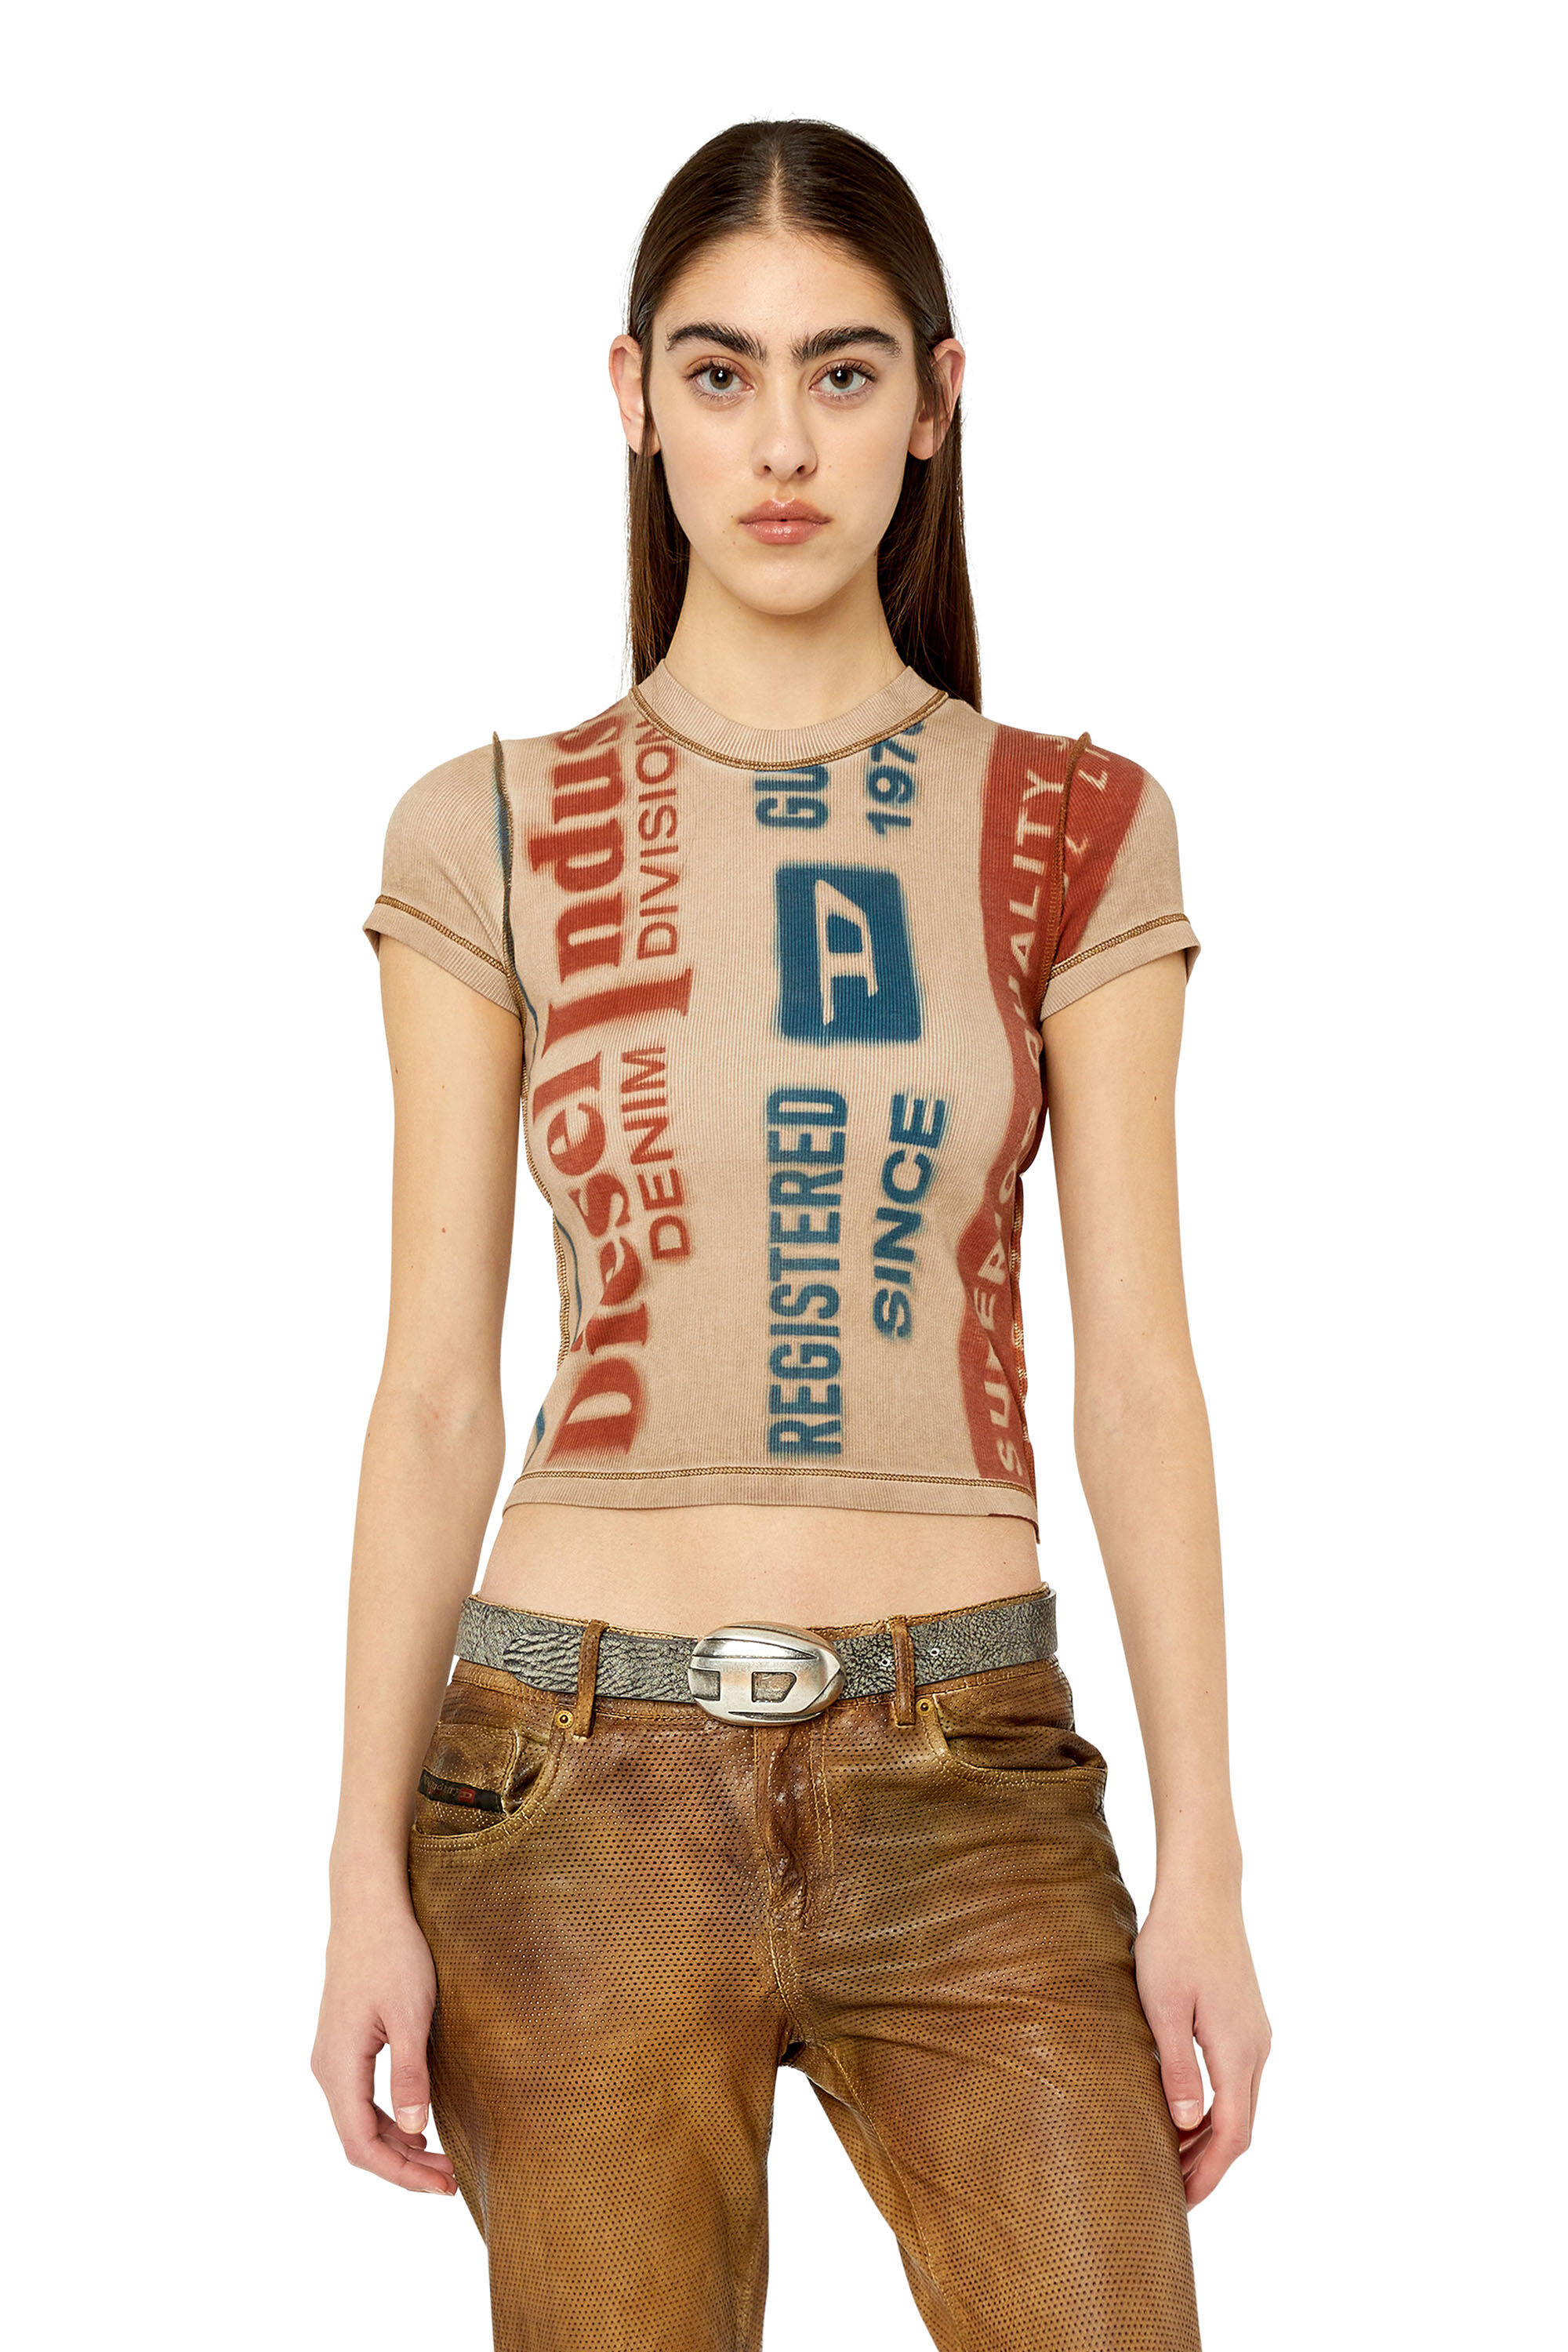 T-SKINZY-G2 Woman: T-shirt with jacron patch print | Diesel